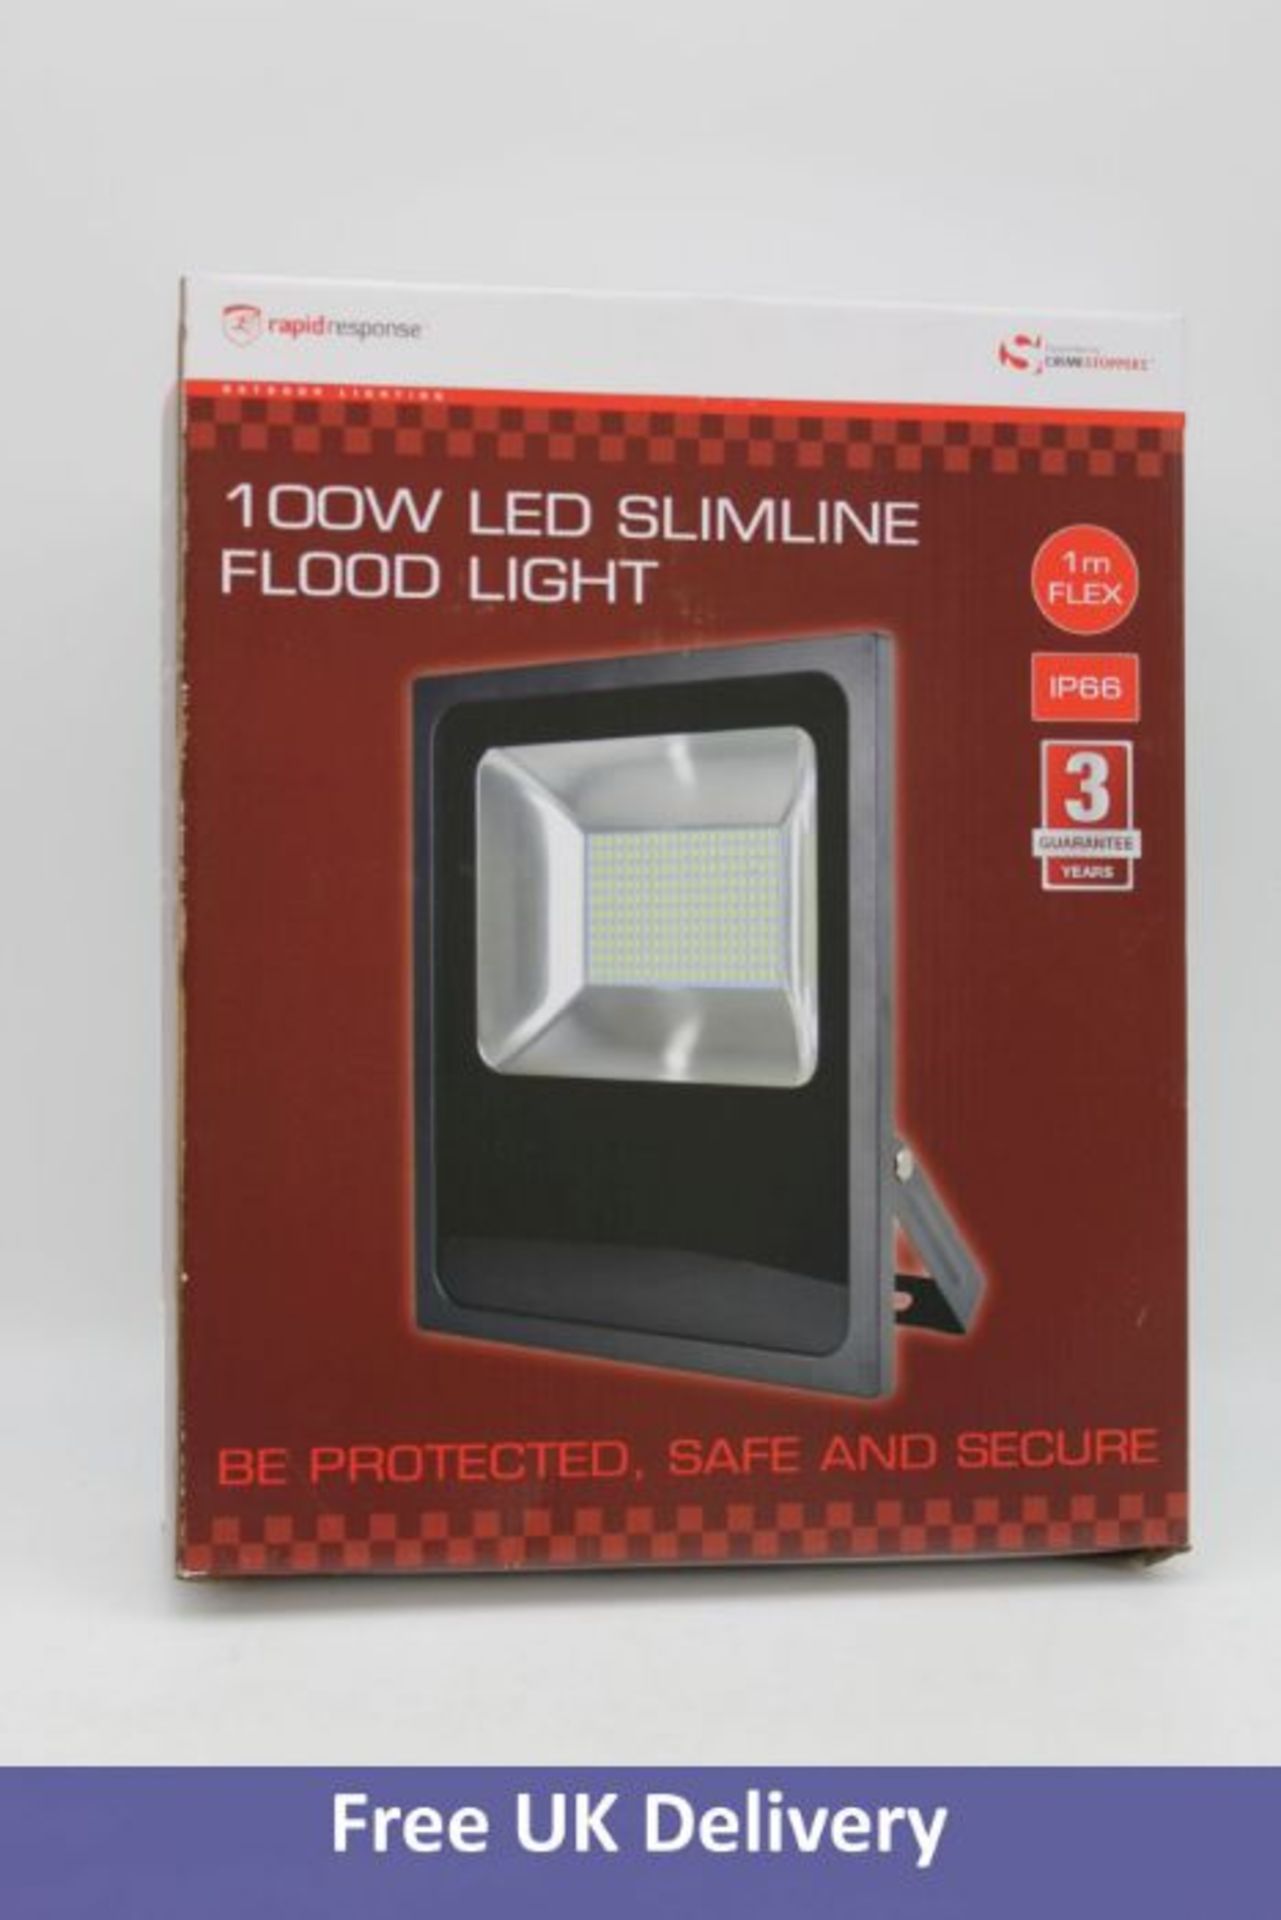 Three Rapid Response 100w Slimline LED Floodlight with 1m Cable, Energy Rating A+, Black